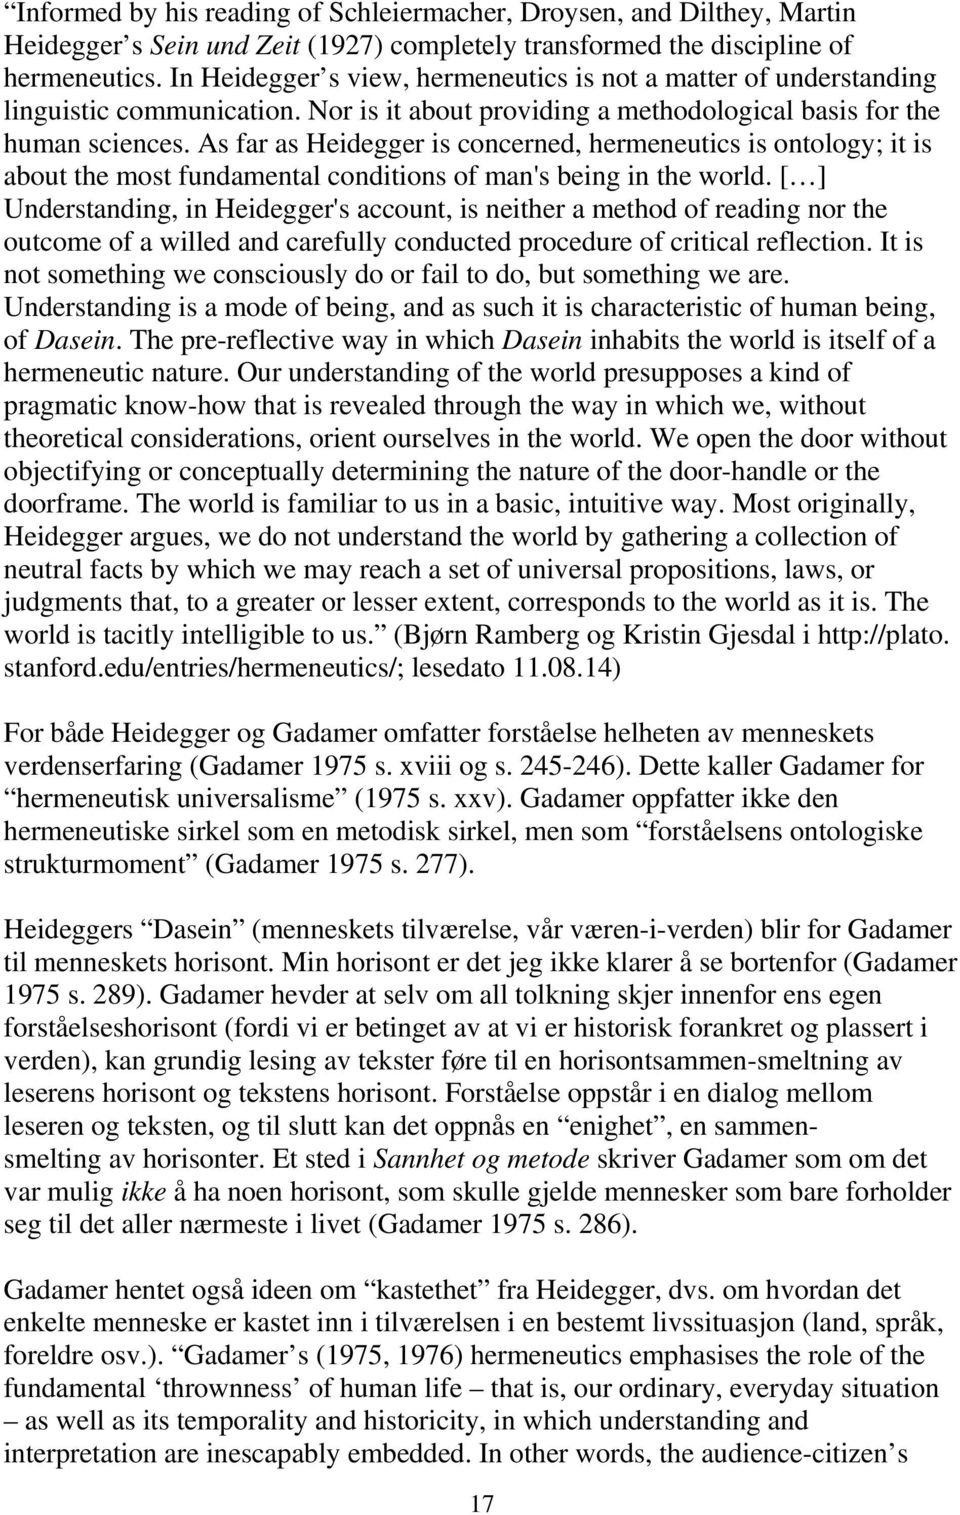 As far as Heidegger is concerned, hermeneutics is ontology; it is about the most fundamental conditions of man's being in the world.